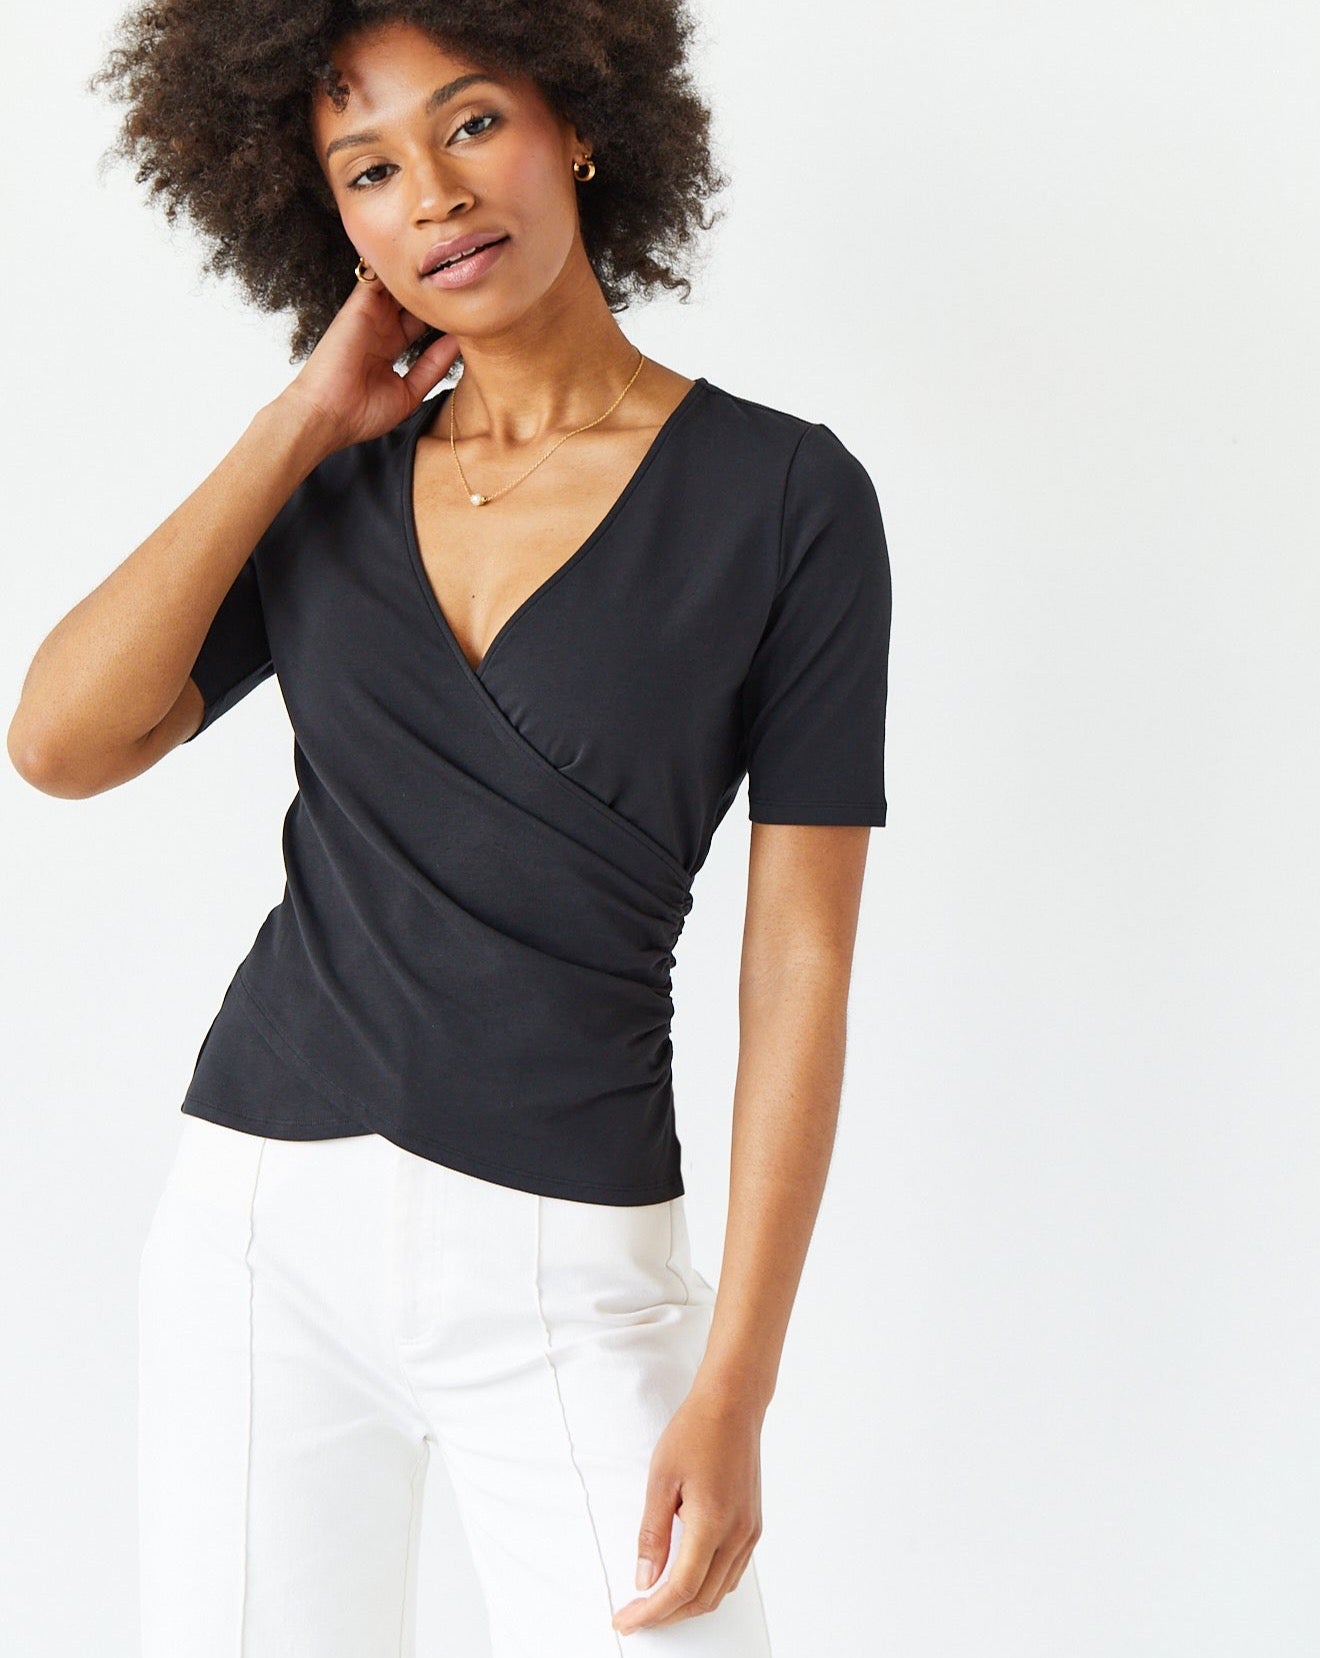 The Jersey Wrap Top